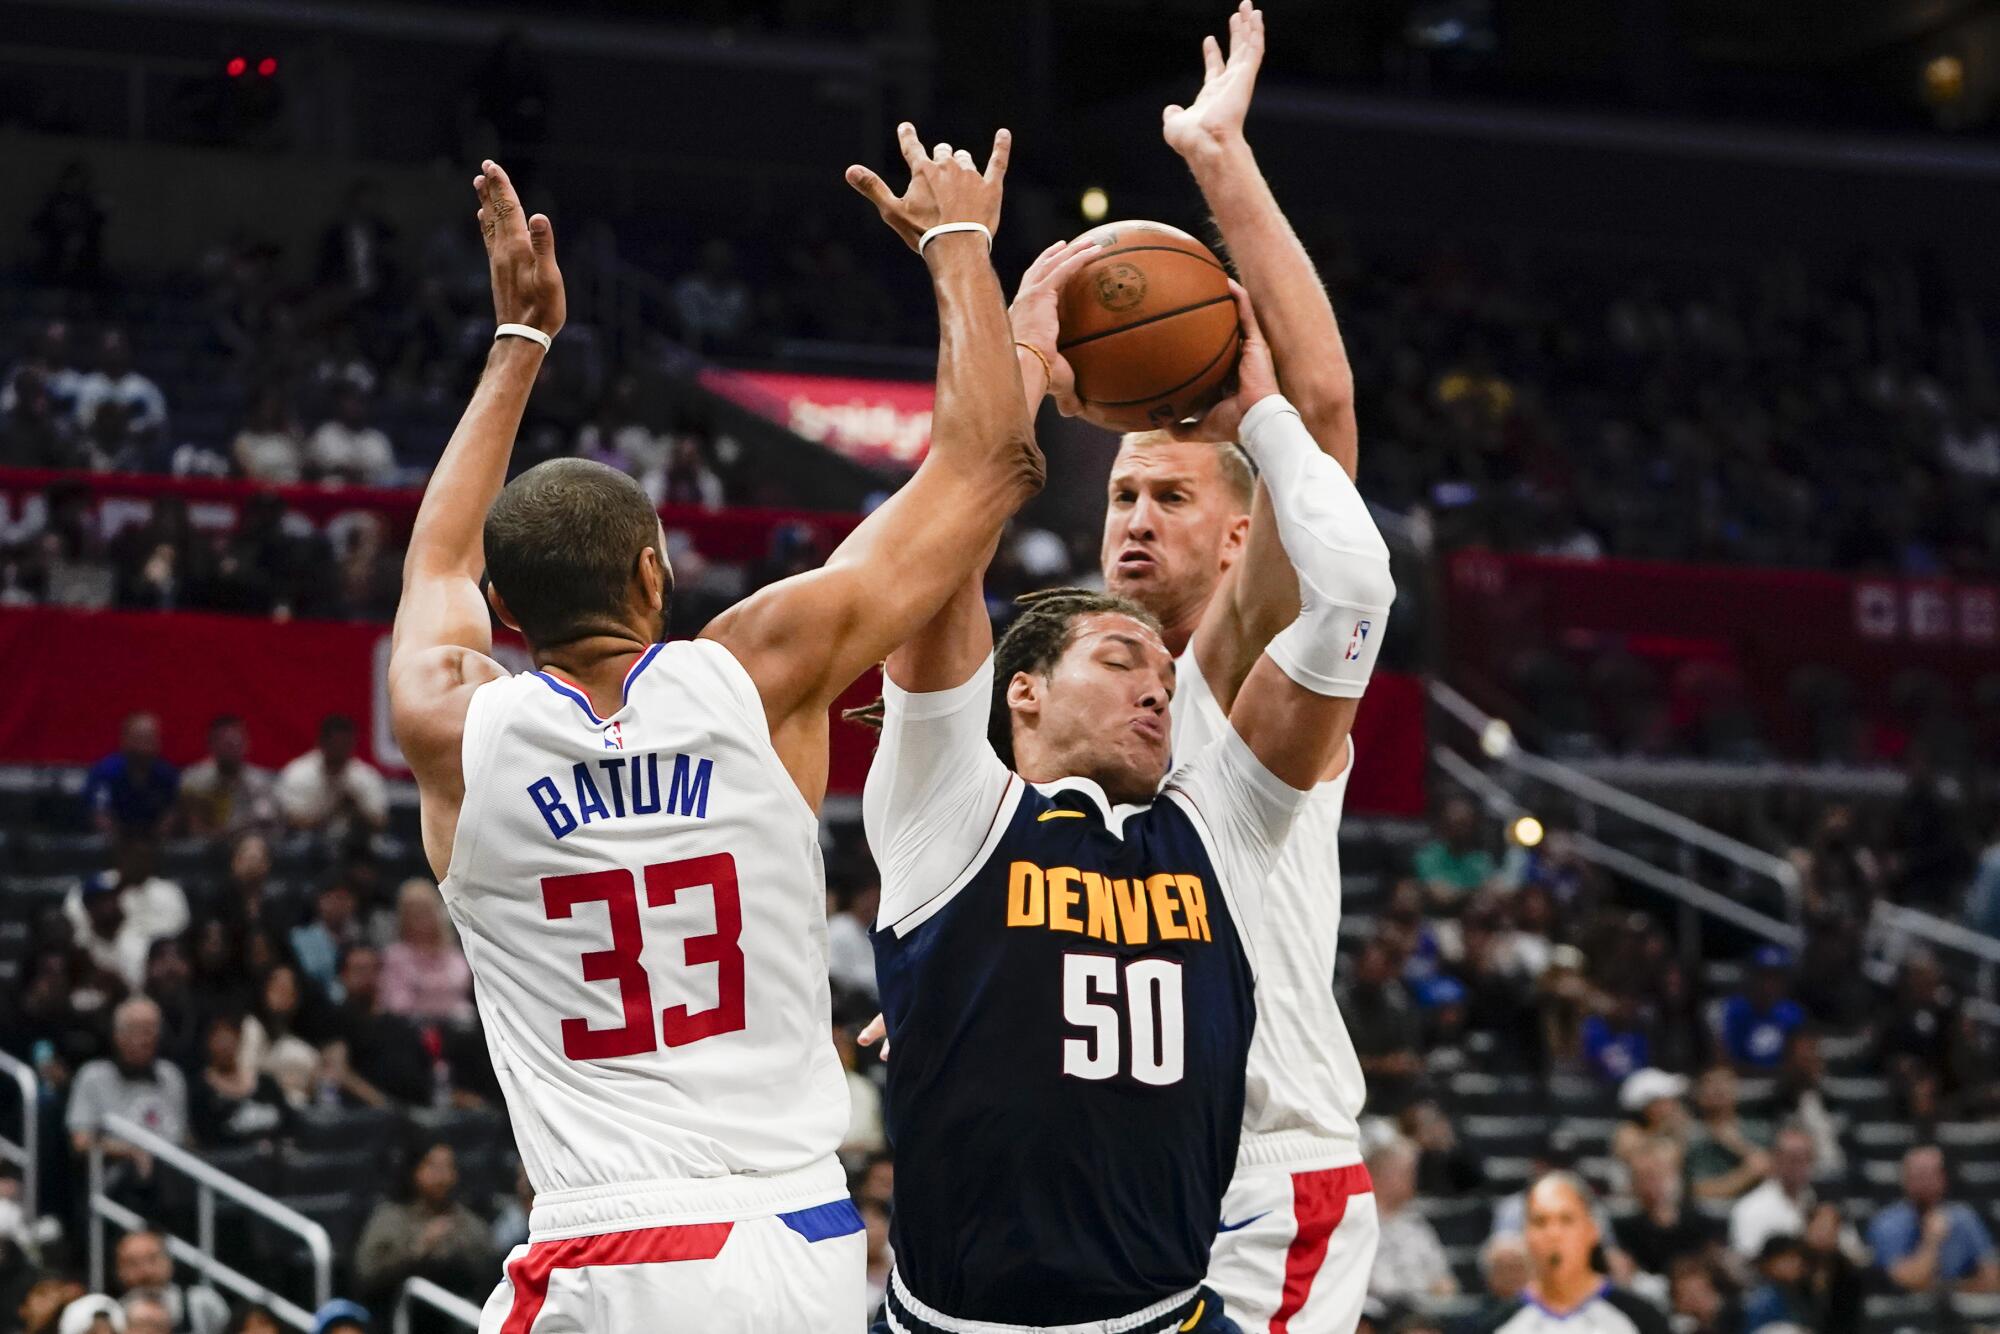 Clippers center Ivica Zubac, back right, and forward Nicolas Batum swarm Nuggets forward Aaron Gordon in the lane.